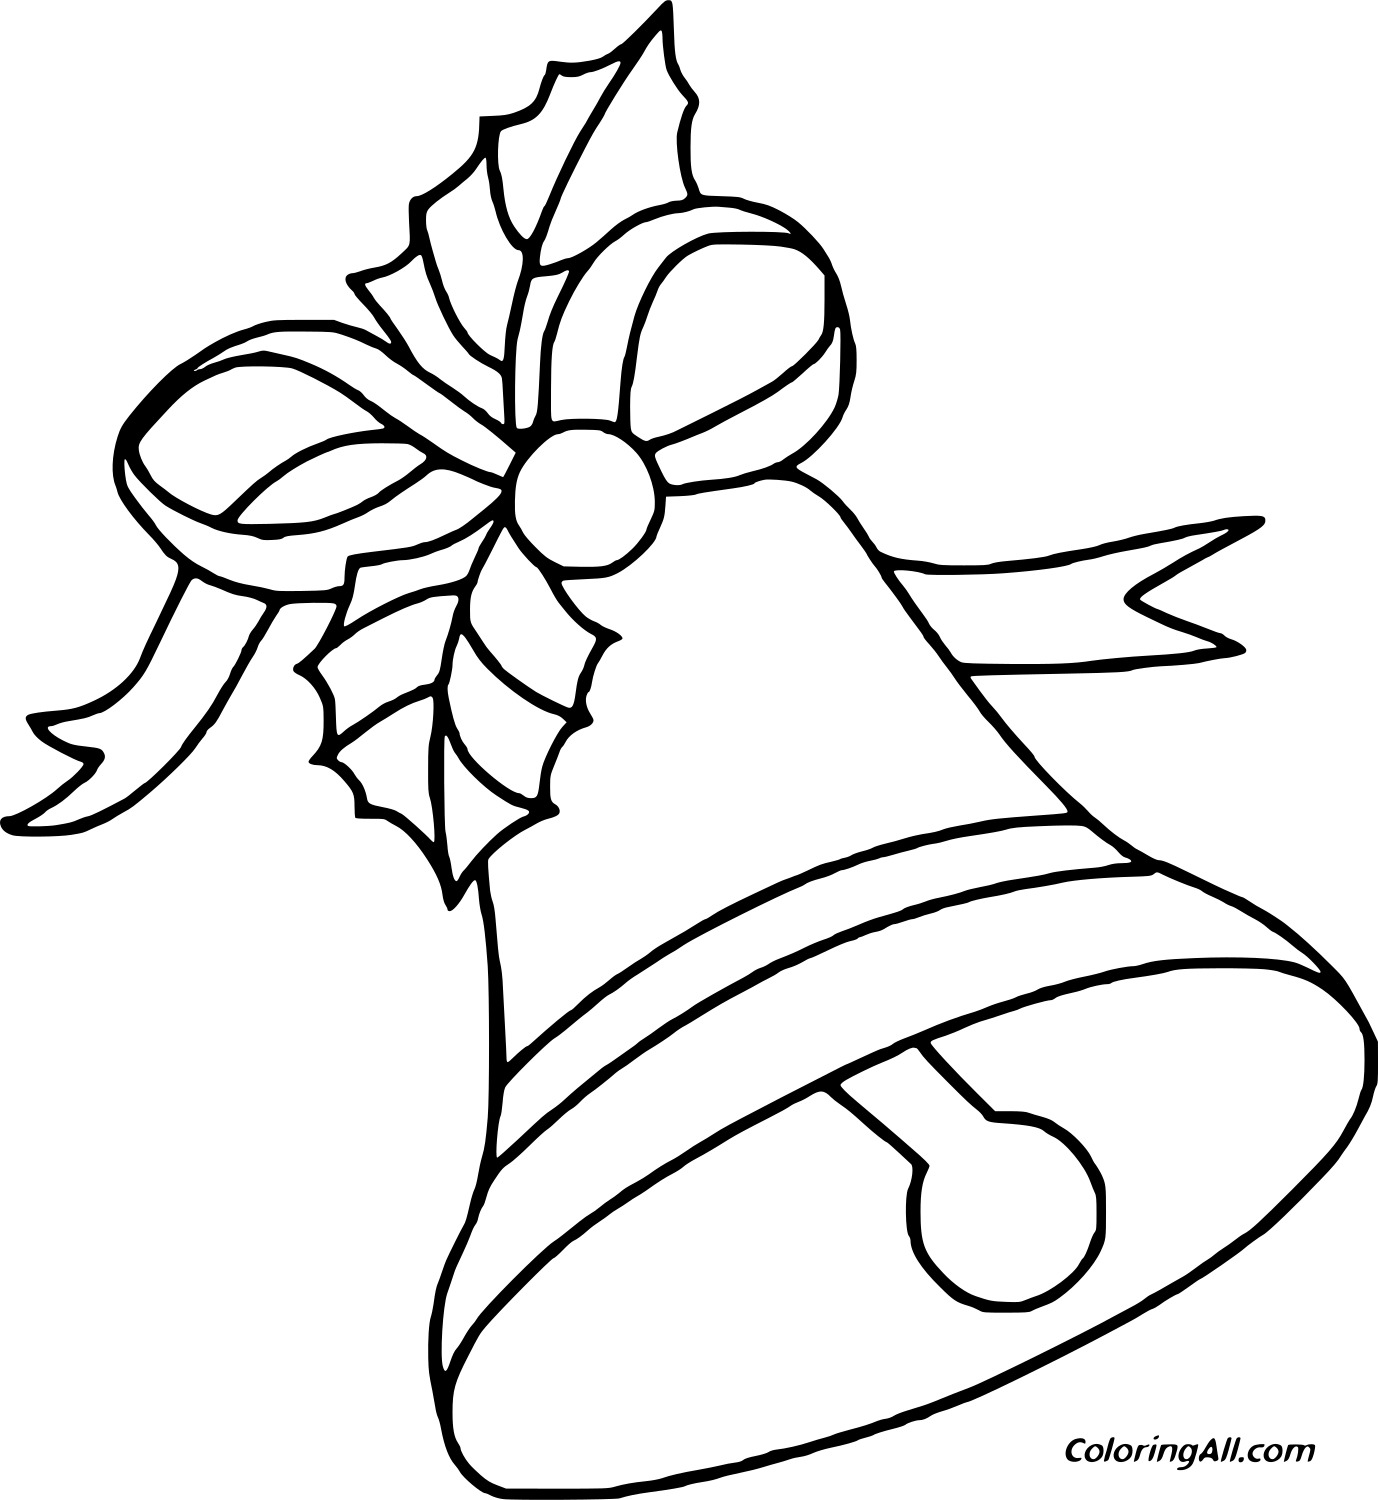 Very Simple Jingle Bell Image For Kids